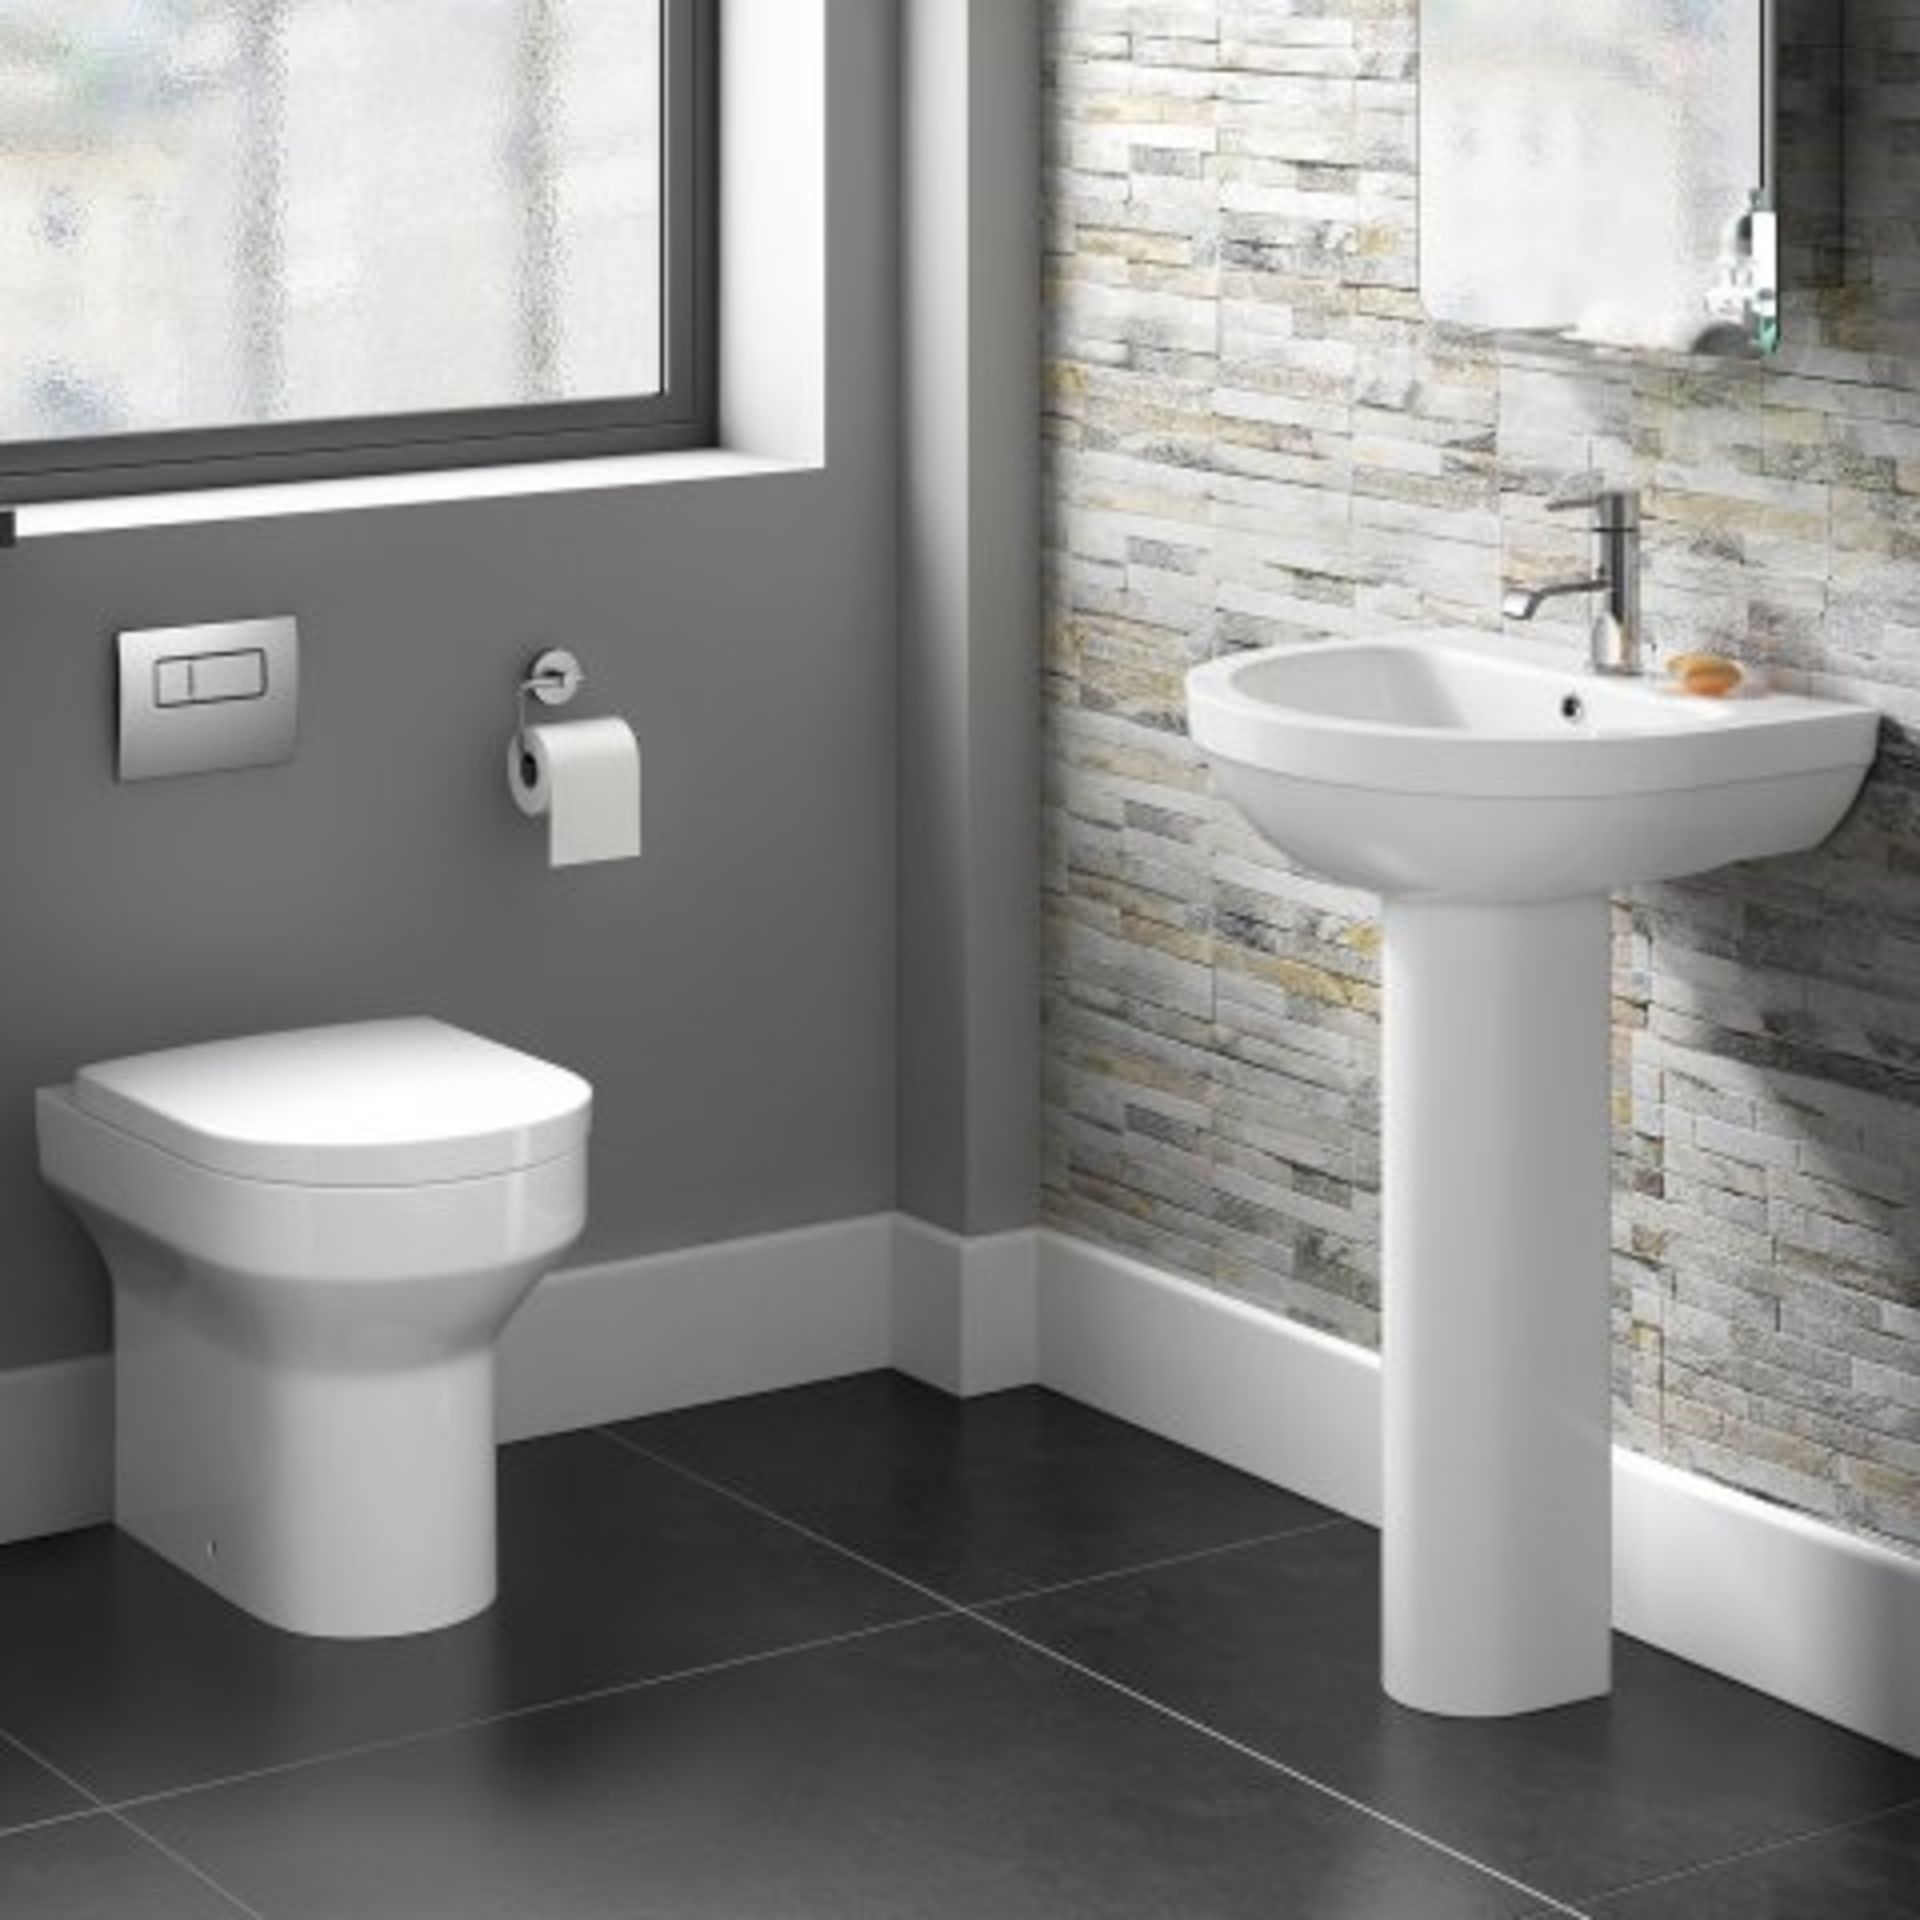 (H69) Cesar III Back to Wall Toilet inc Seat. RRP £349.99. This stylish back to wall toilet looks - Image 2 of 3